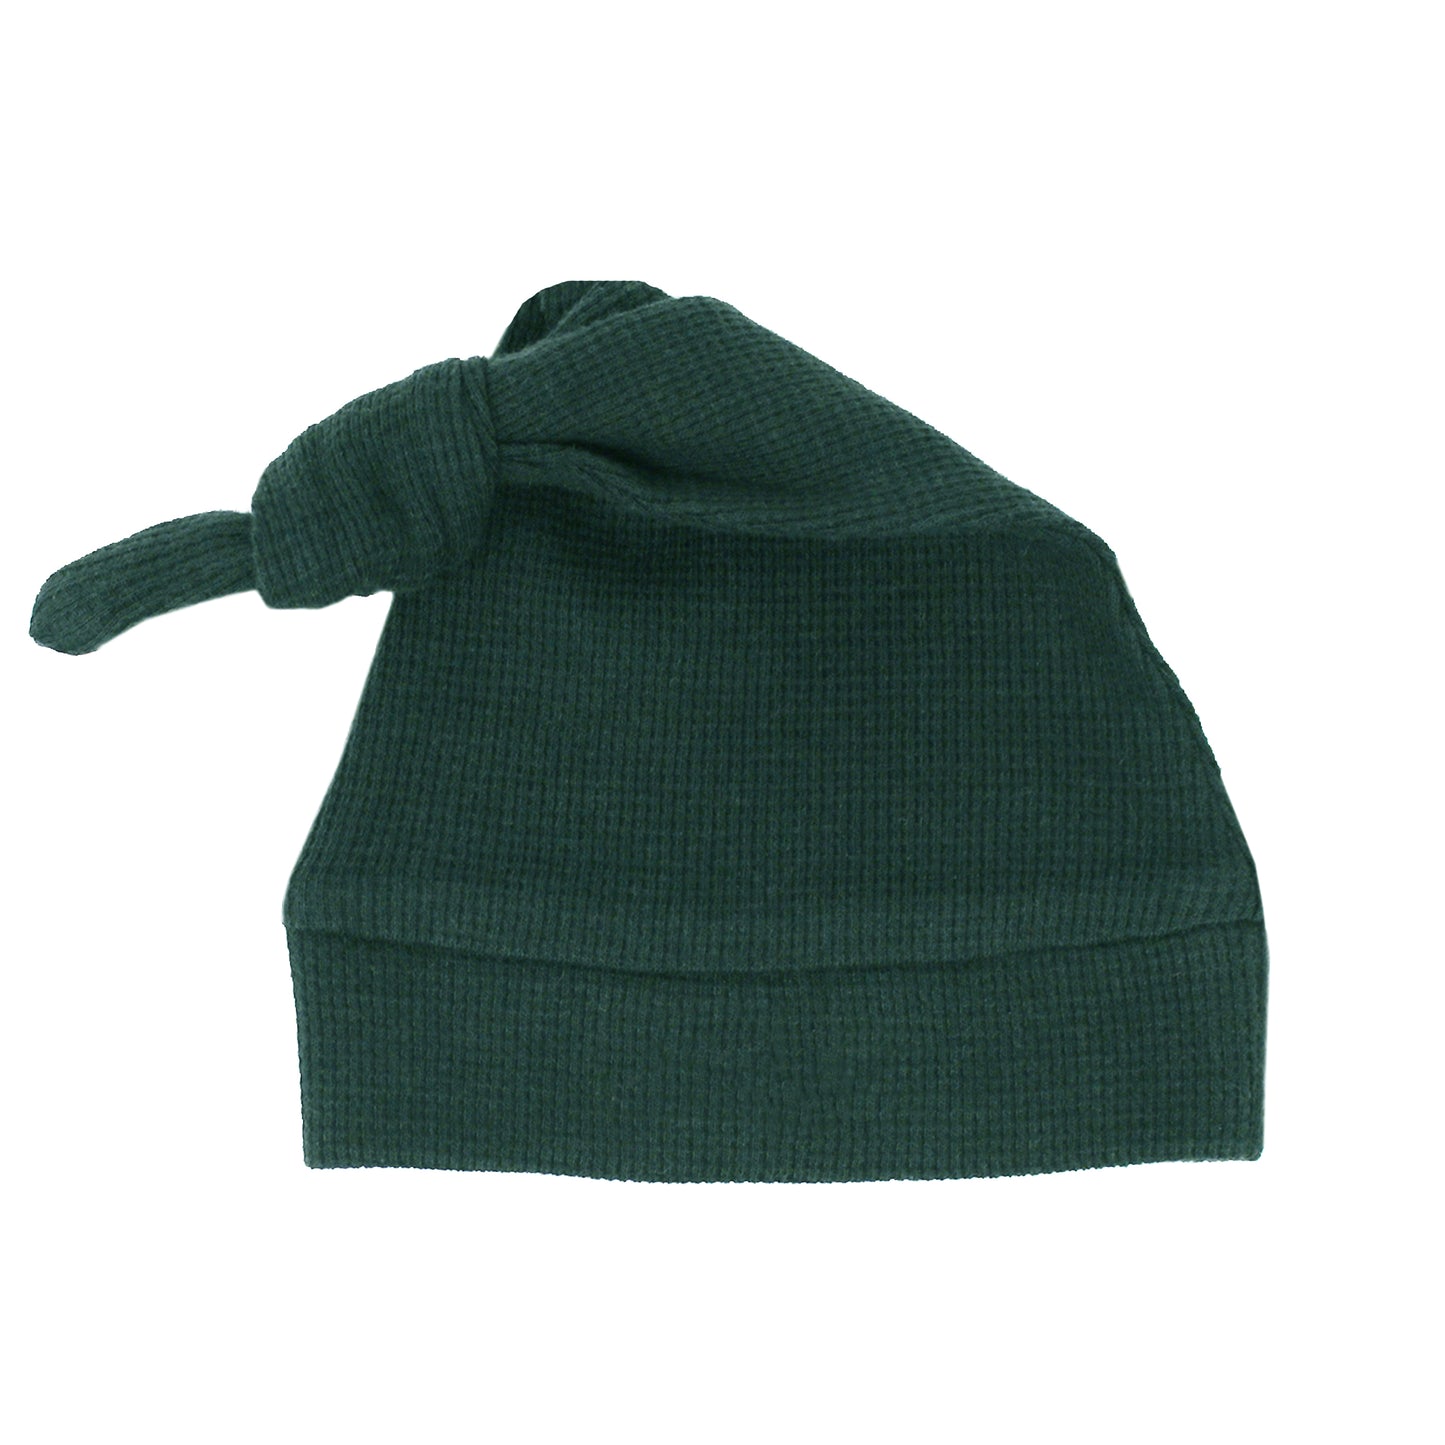 Knotted Cap - Organic Thermal (Pine)